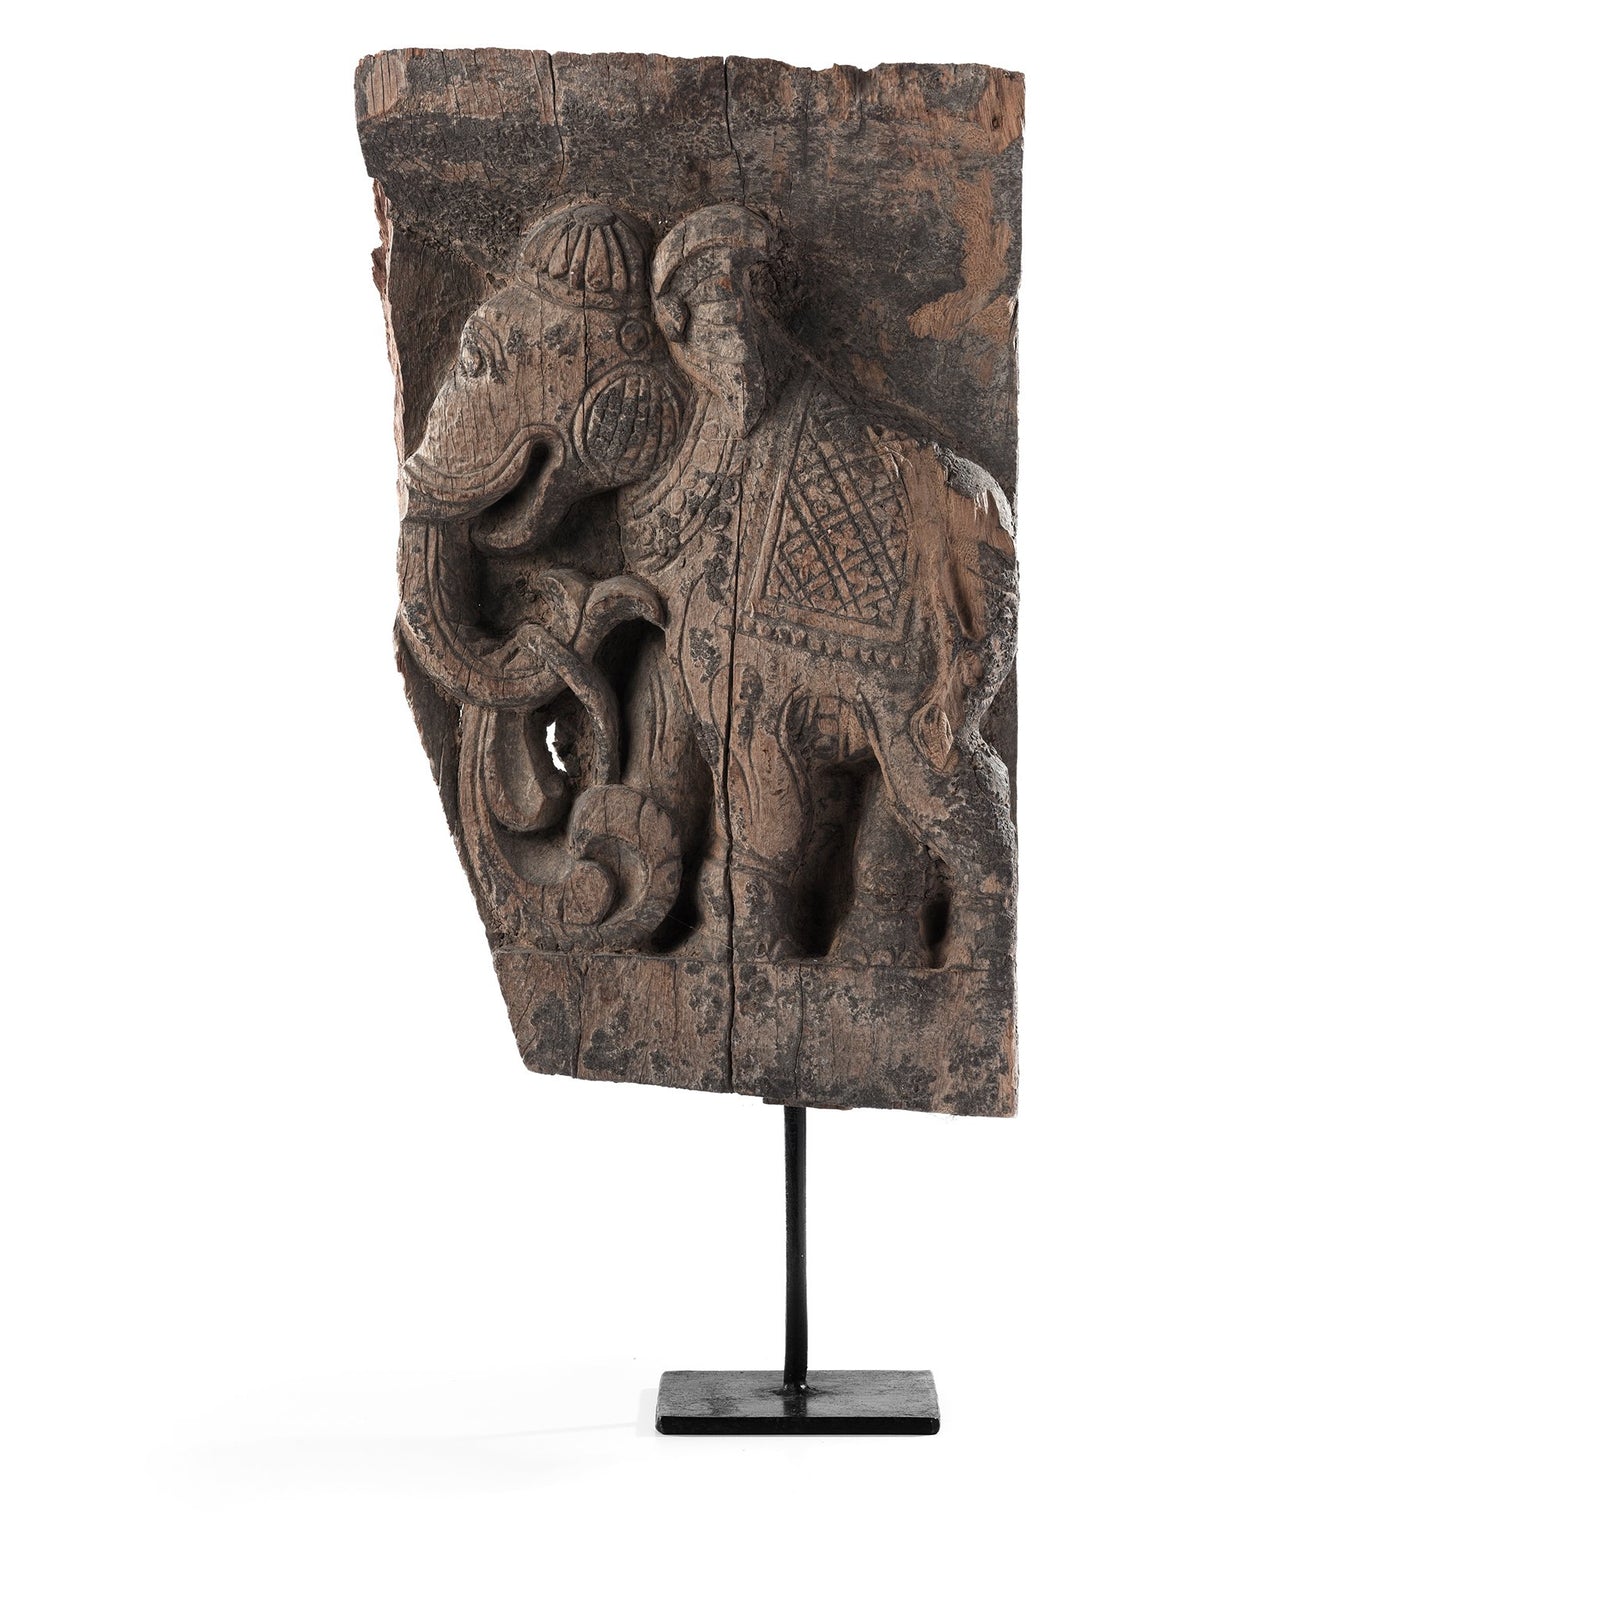 Carved Teakwood Elephant Chariot Panel  -  Early 19thC from Maharasthra - 23 x 9 x 48.5  (wxdxh cms) - A5619V1